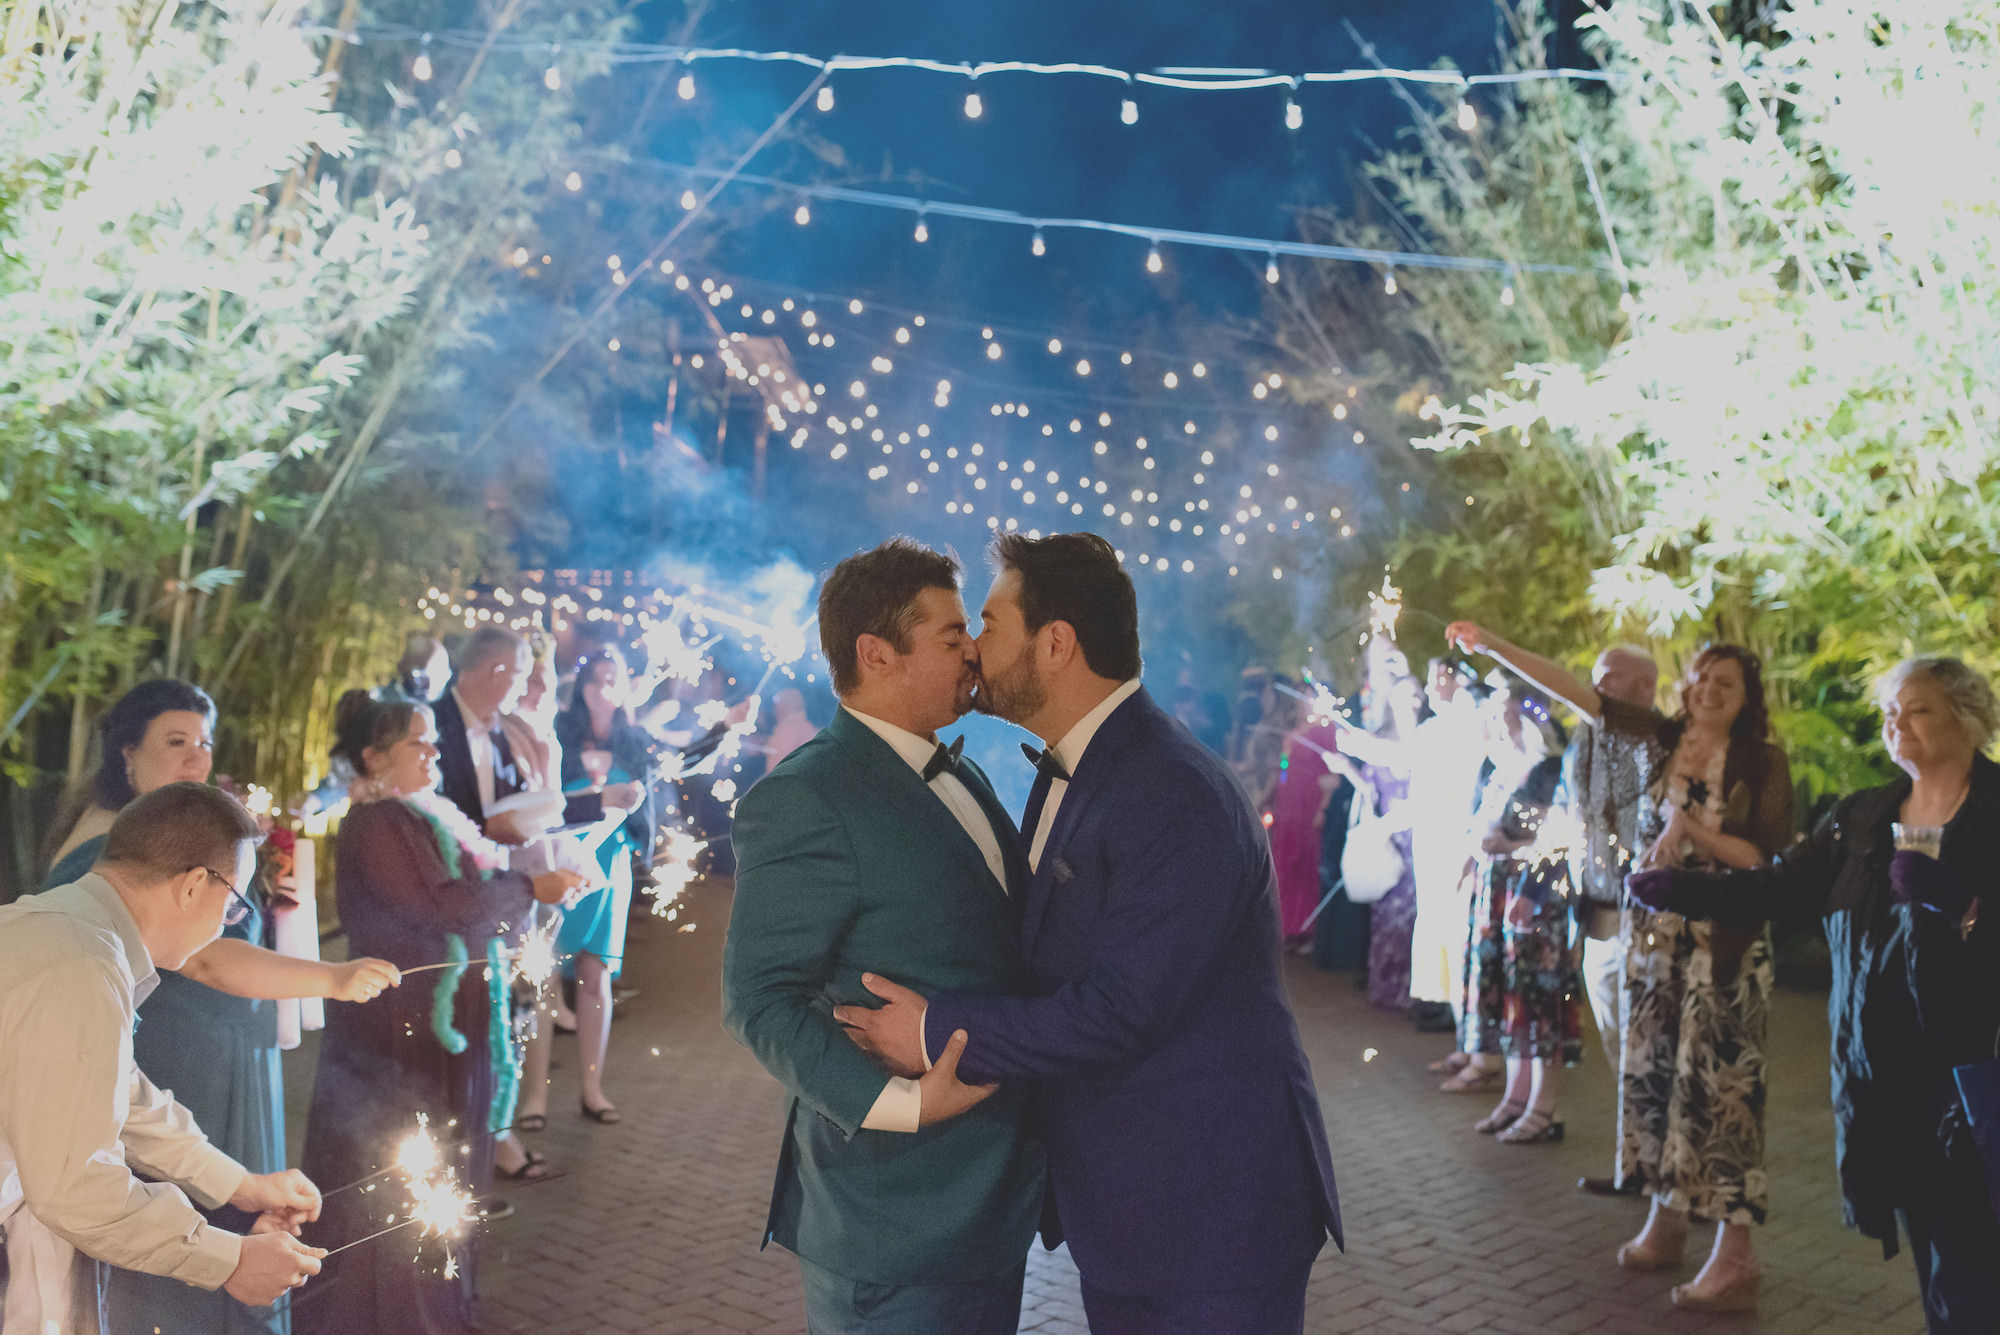 Two Grooms in Jewel Toned Tropical Inspired Suits Sparkler Exit Wedding Portrait| St. Pete Wedding NOVA 535 | Florida Wedding Photographer Kristen Marie Photography